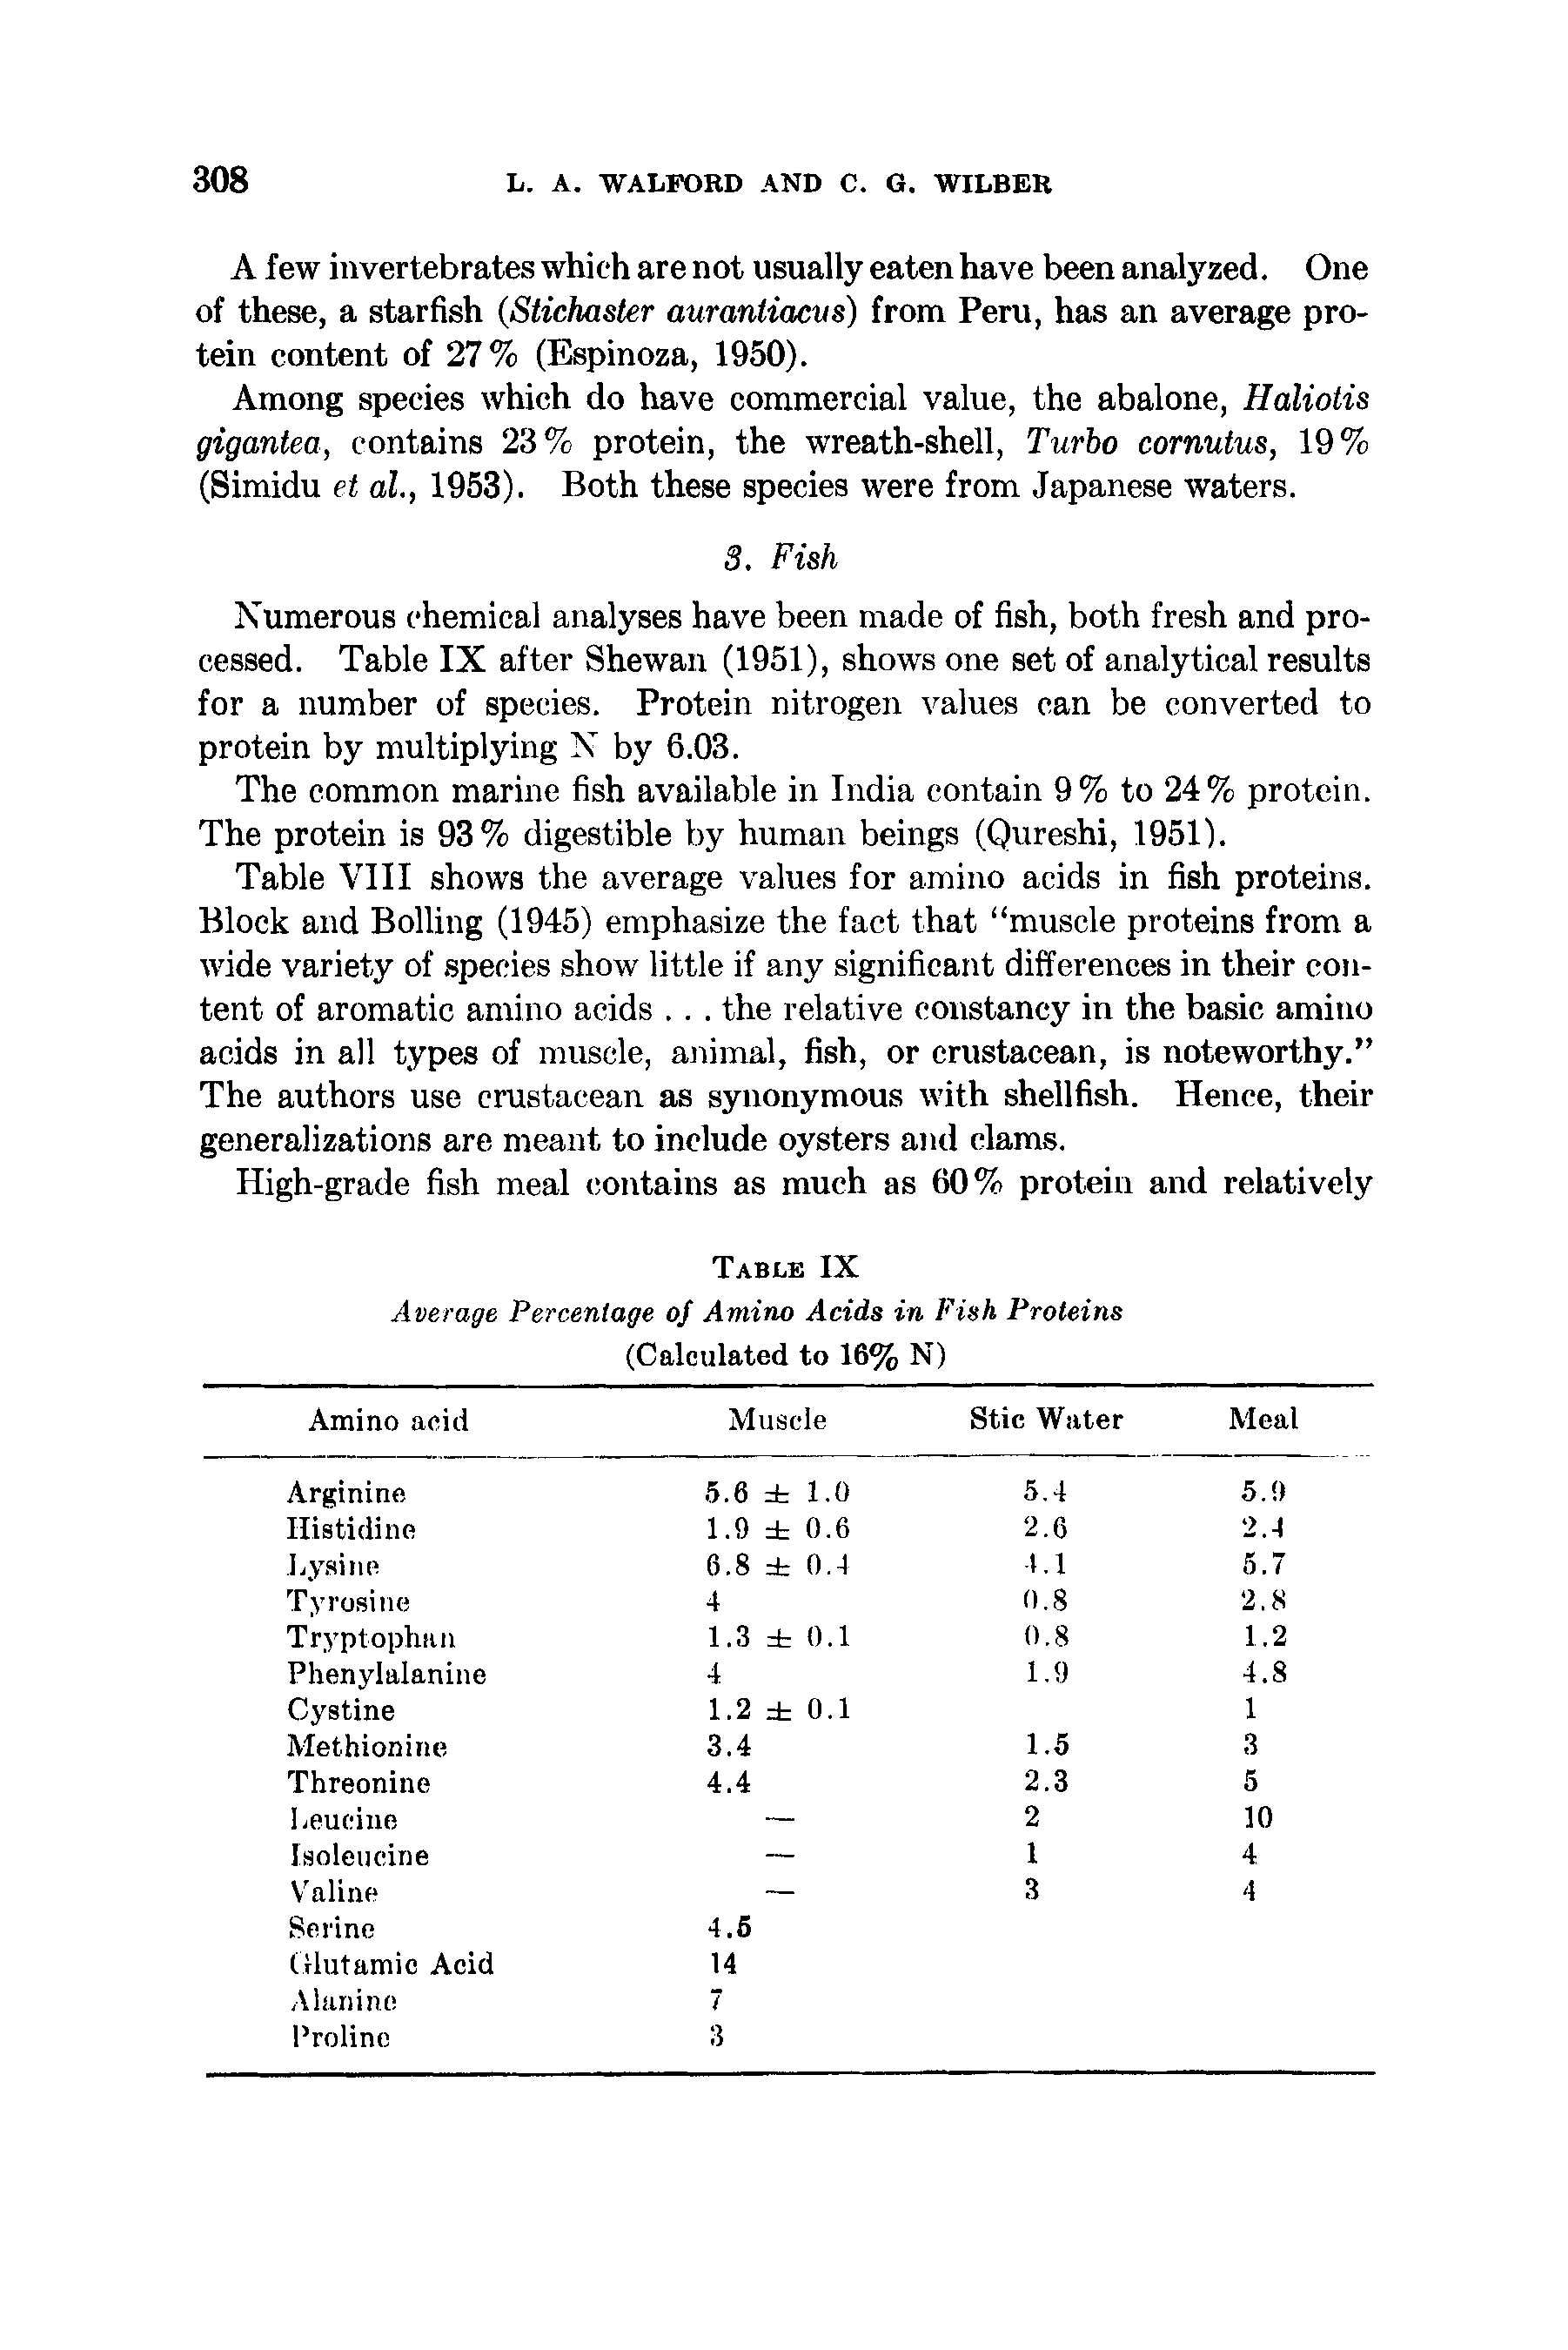 Table VIII shows the average values for amino acids in fish proteins. Block and Bolling (1945) emphasize the fact that muscle proteins from a wide variety of species show little if any significant differences in their content of aromatic amino acids. . . the relative constancy in the basic amino acids in all types of muscle, animal, fish, or crustacean, is noteworthy. The authors use crustacean as synonymous with shellfish. Hence, their generalizations are meant to include oysters and clams.